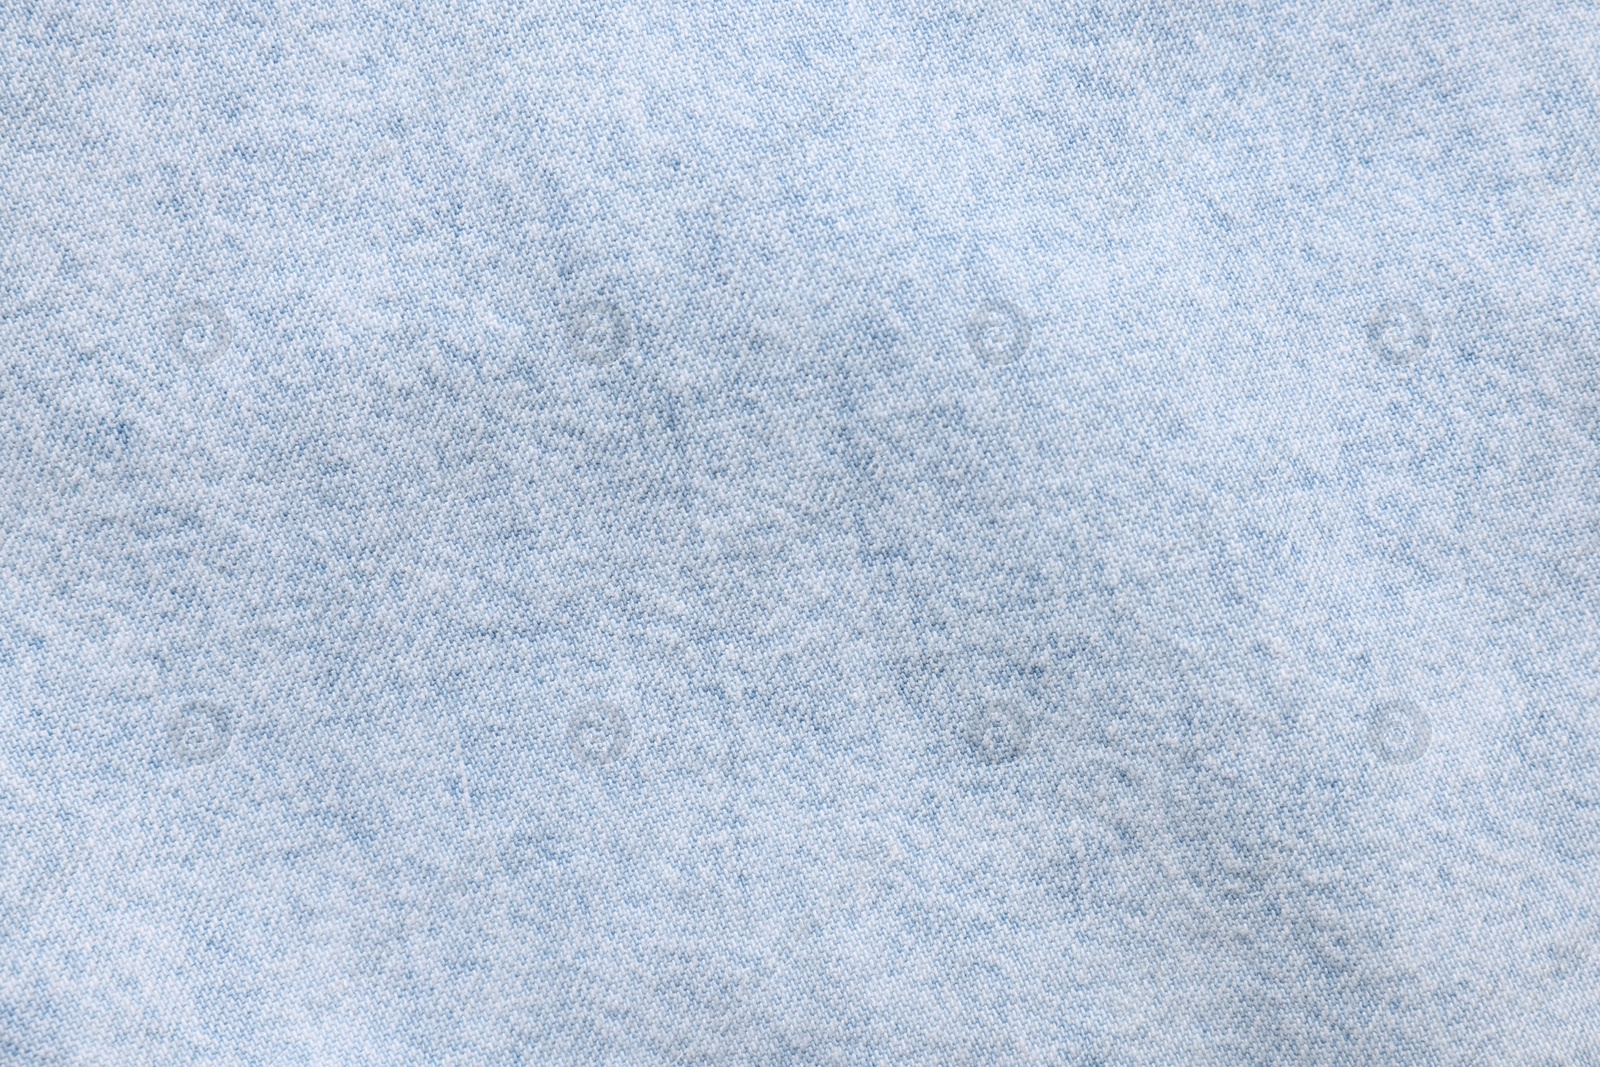 Photo of Texture of light blue fabric as background, top view